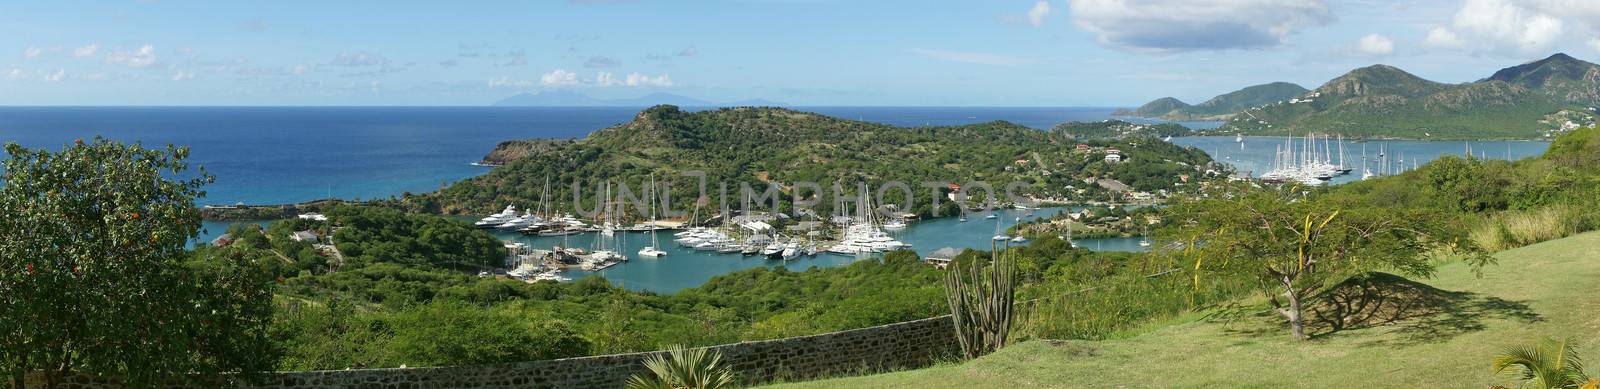 English Harbour and Nelsons Dockyard, Antigua and Barbuda, Carib by alfotokunst